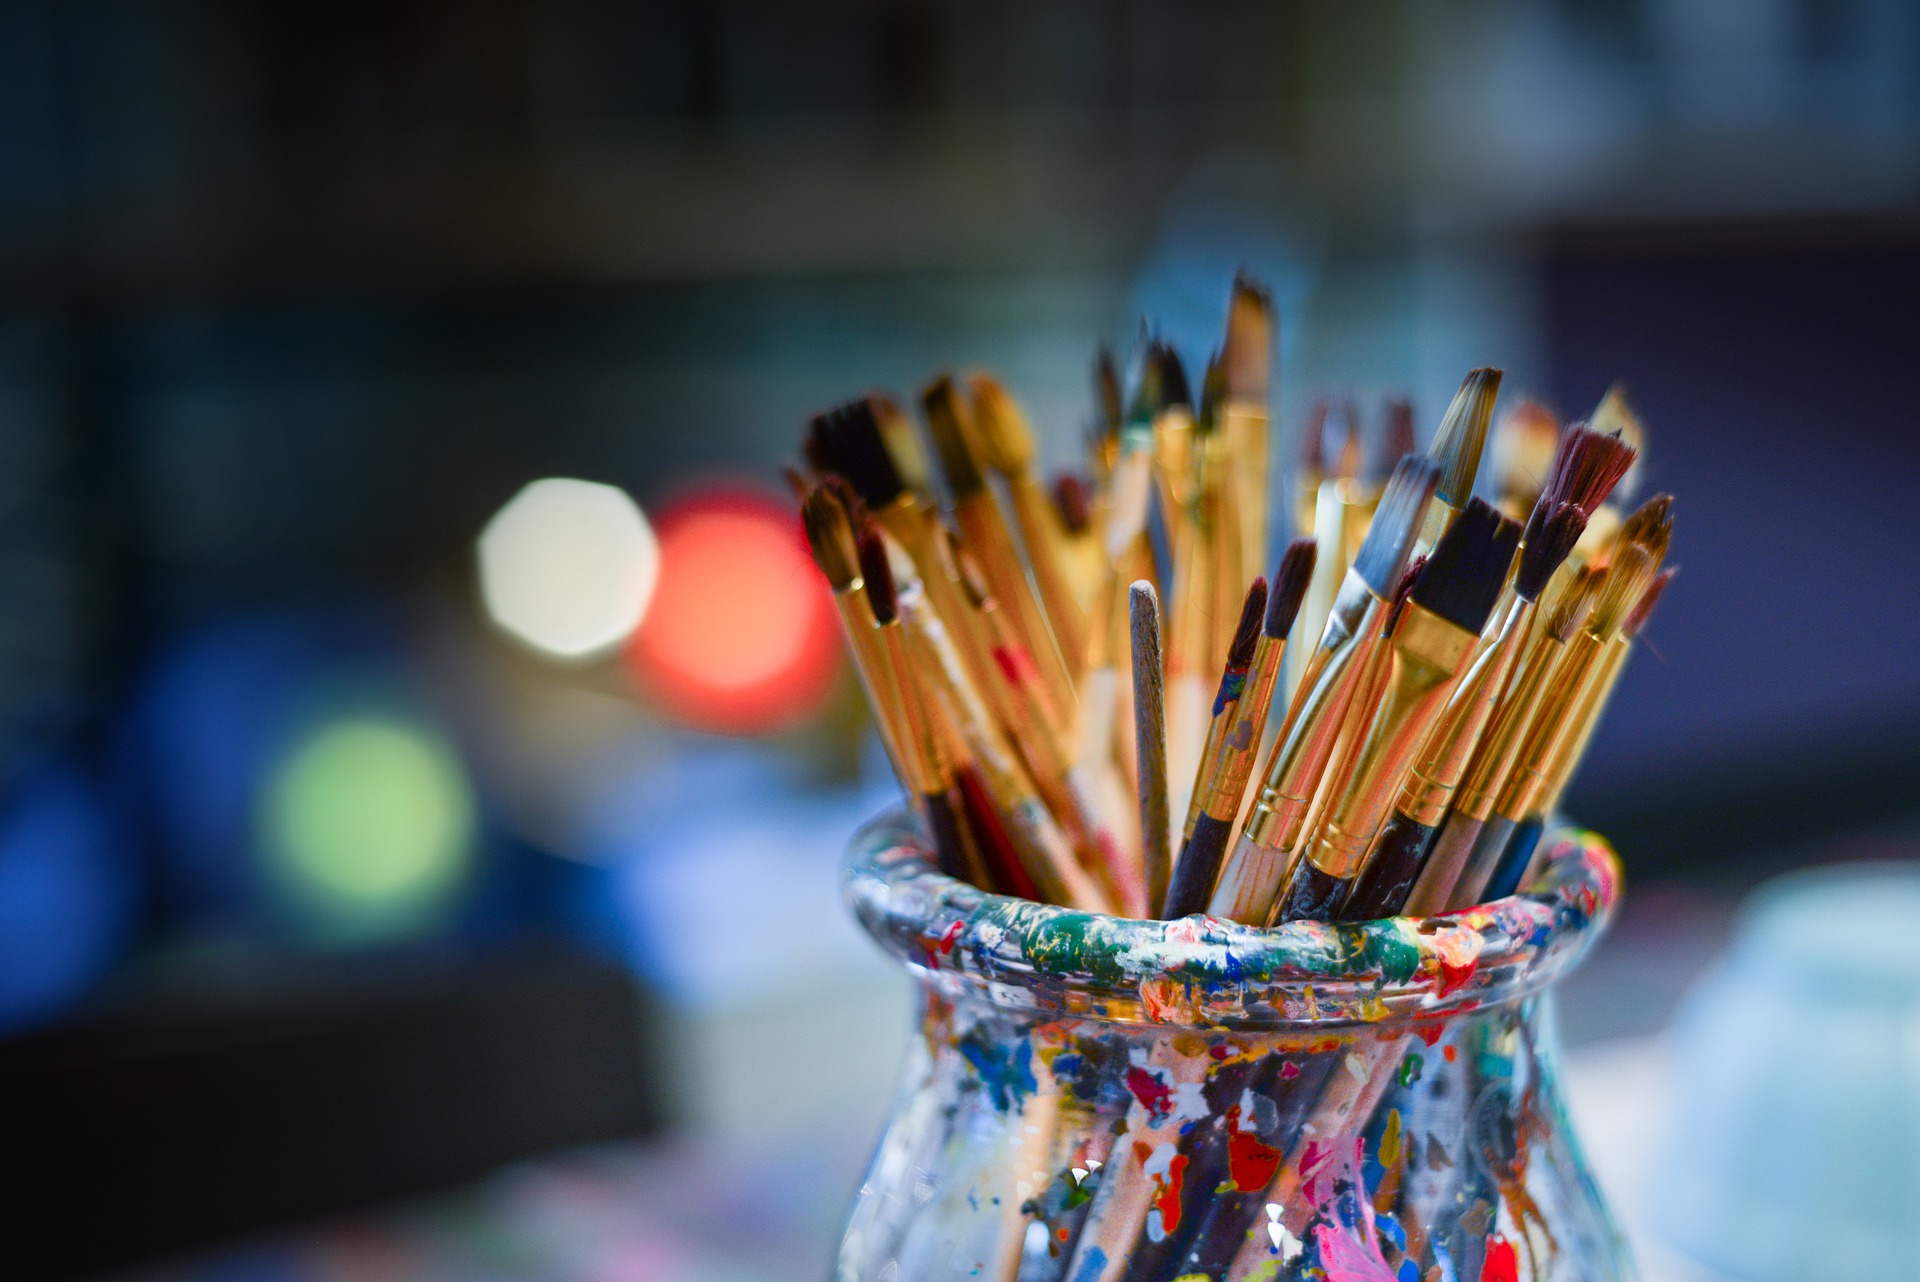 Many small paint brushes in a glass mason against a blurred dark background 